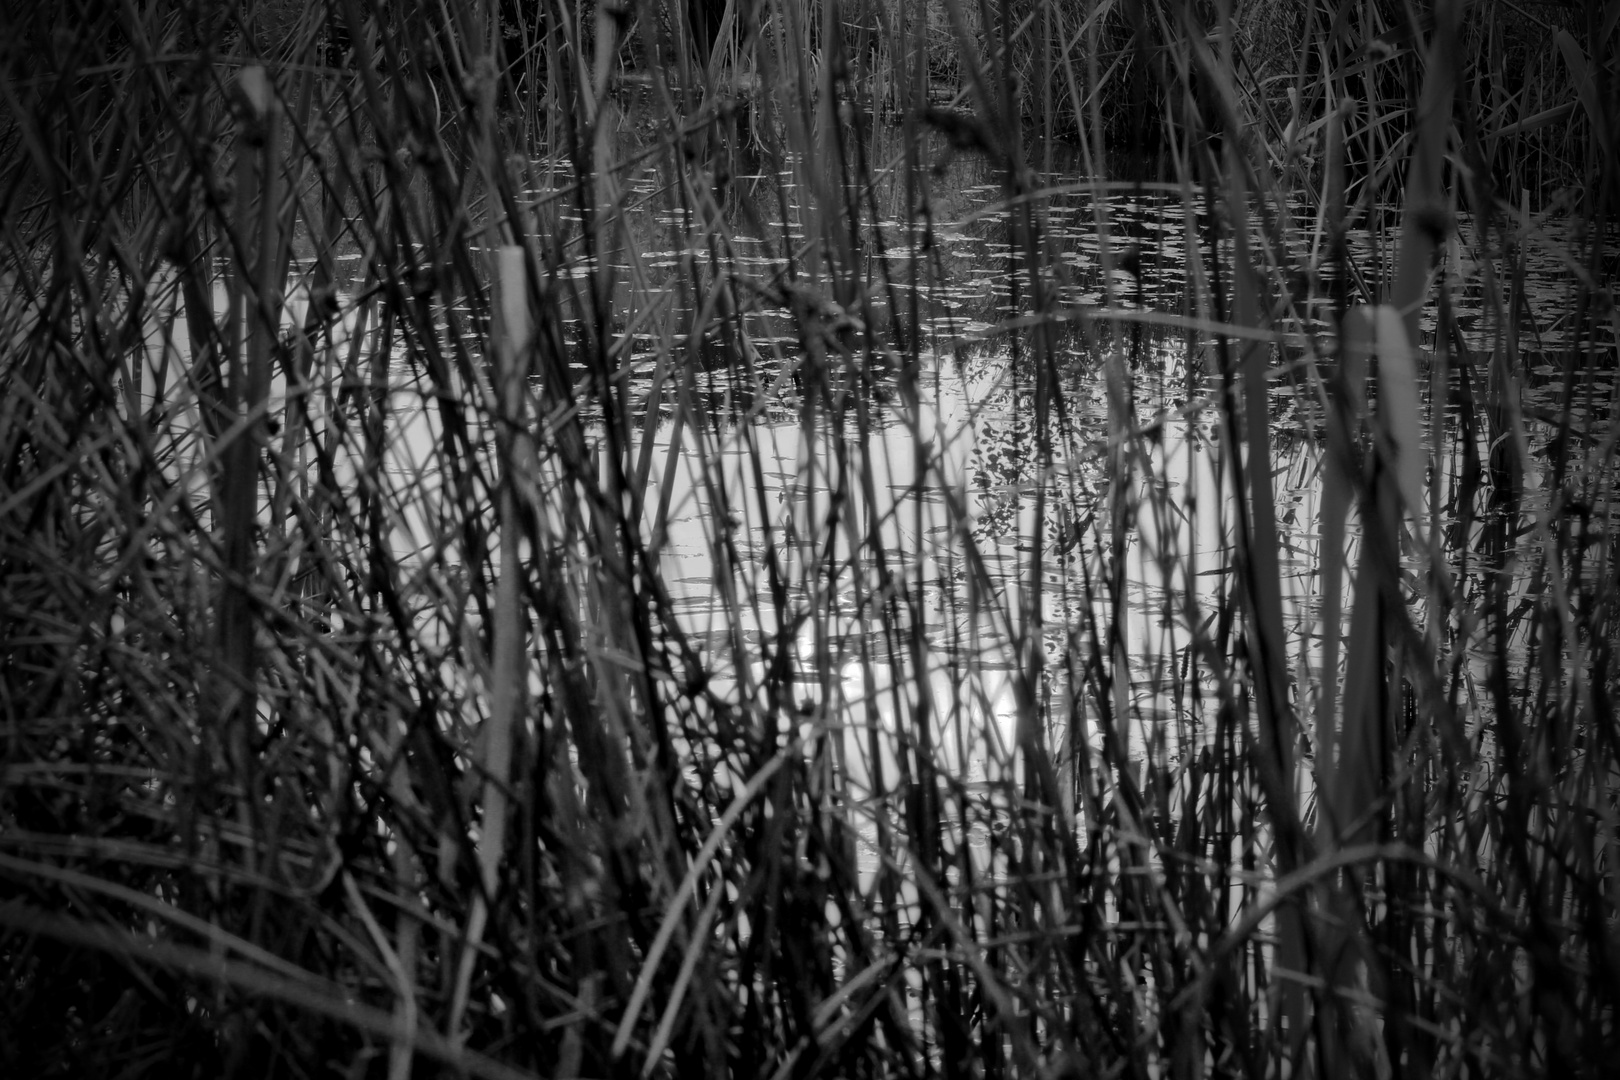 among the reeds